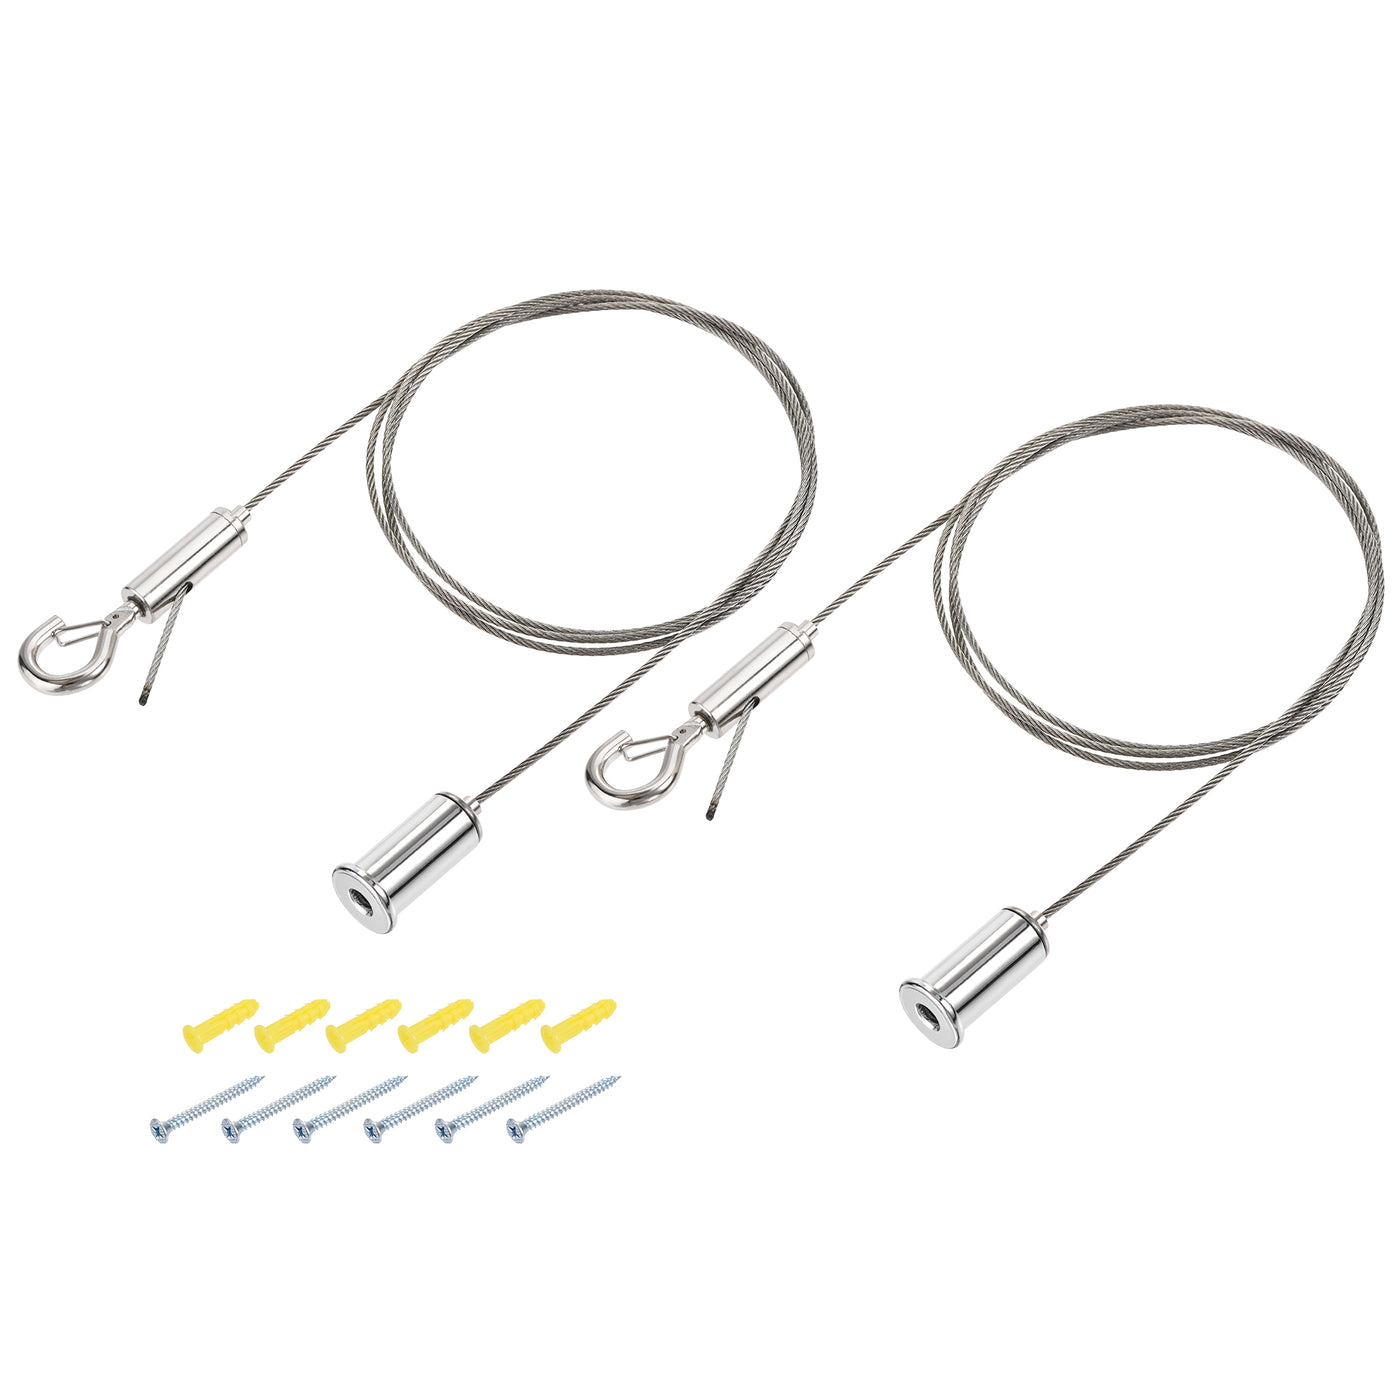 uxcell Uxcell Picture Hanging Wire Hooks Kit, 2Set 1.5M Adjustable Hanger Wire for Home Art Gallery Picture Display Kit, Load 33 lbs, with 6Set Screws